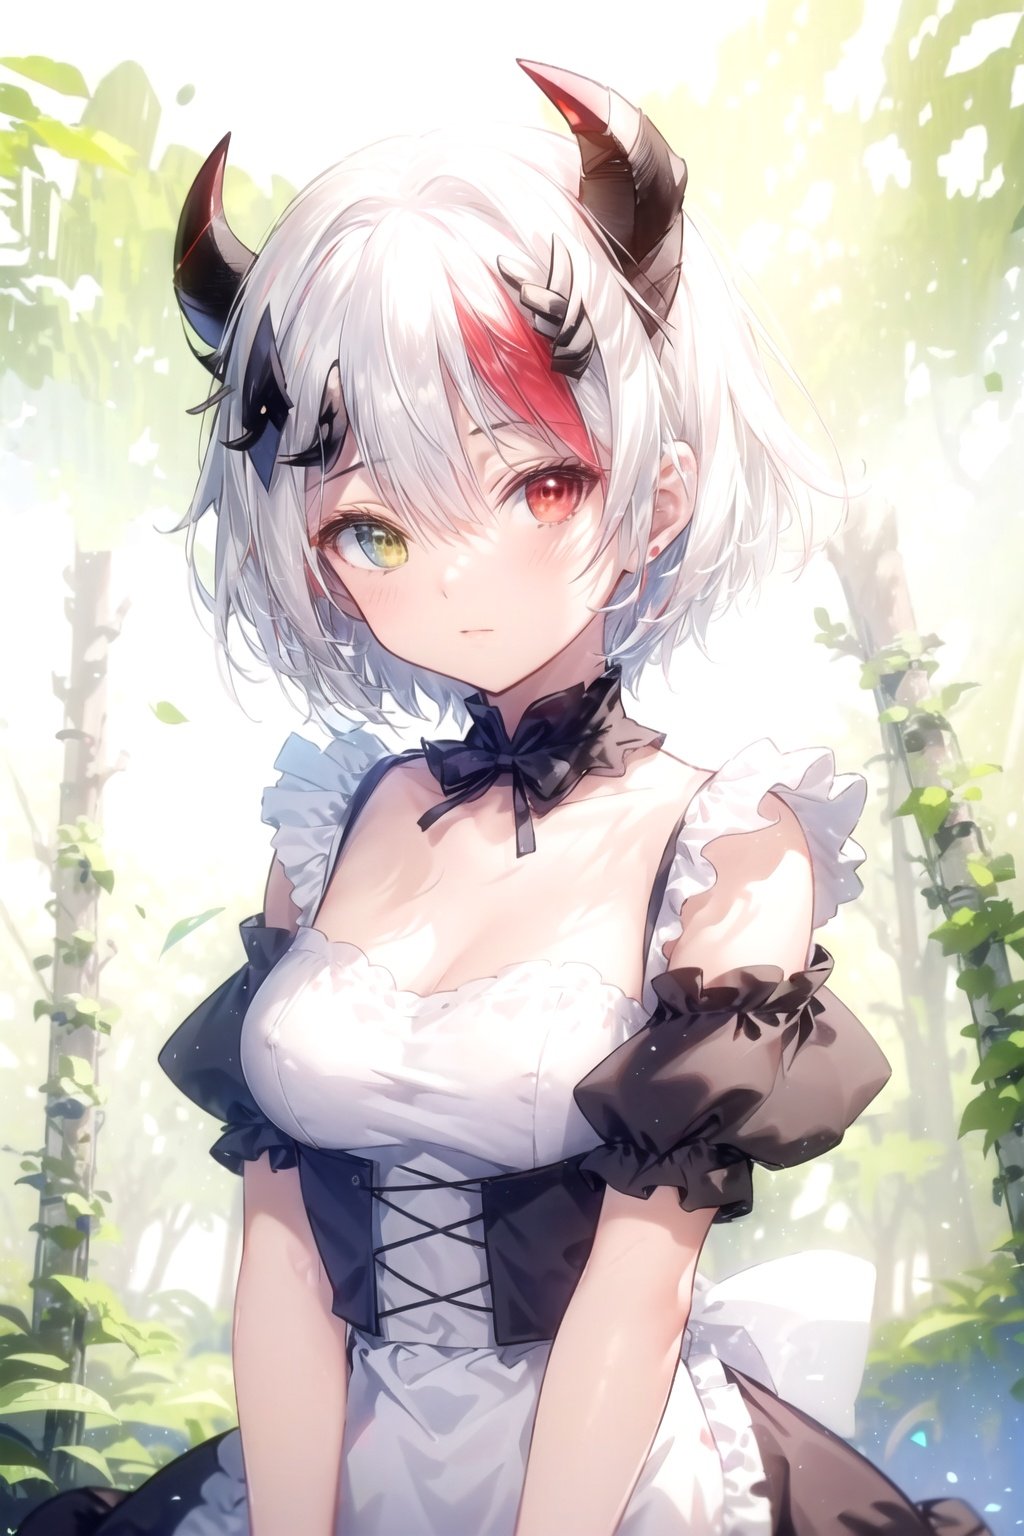  (detailed light), (an extremely delicate and beautiful), volume light, best shadow,cinematic lighting, flash, Depth of field, dynamic angle, Oily skin, (upper body)(solo:1.2),(short hair,white hair:1.3),((rem:0.7)+(miku:0.8)),has(2 red horns:1.2),(heterochromia<(red,blue)>),(black_white maid_outfit) (off shoulder) (frills:1.2),(in forest),